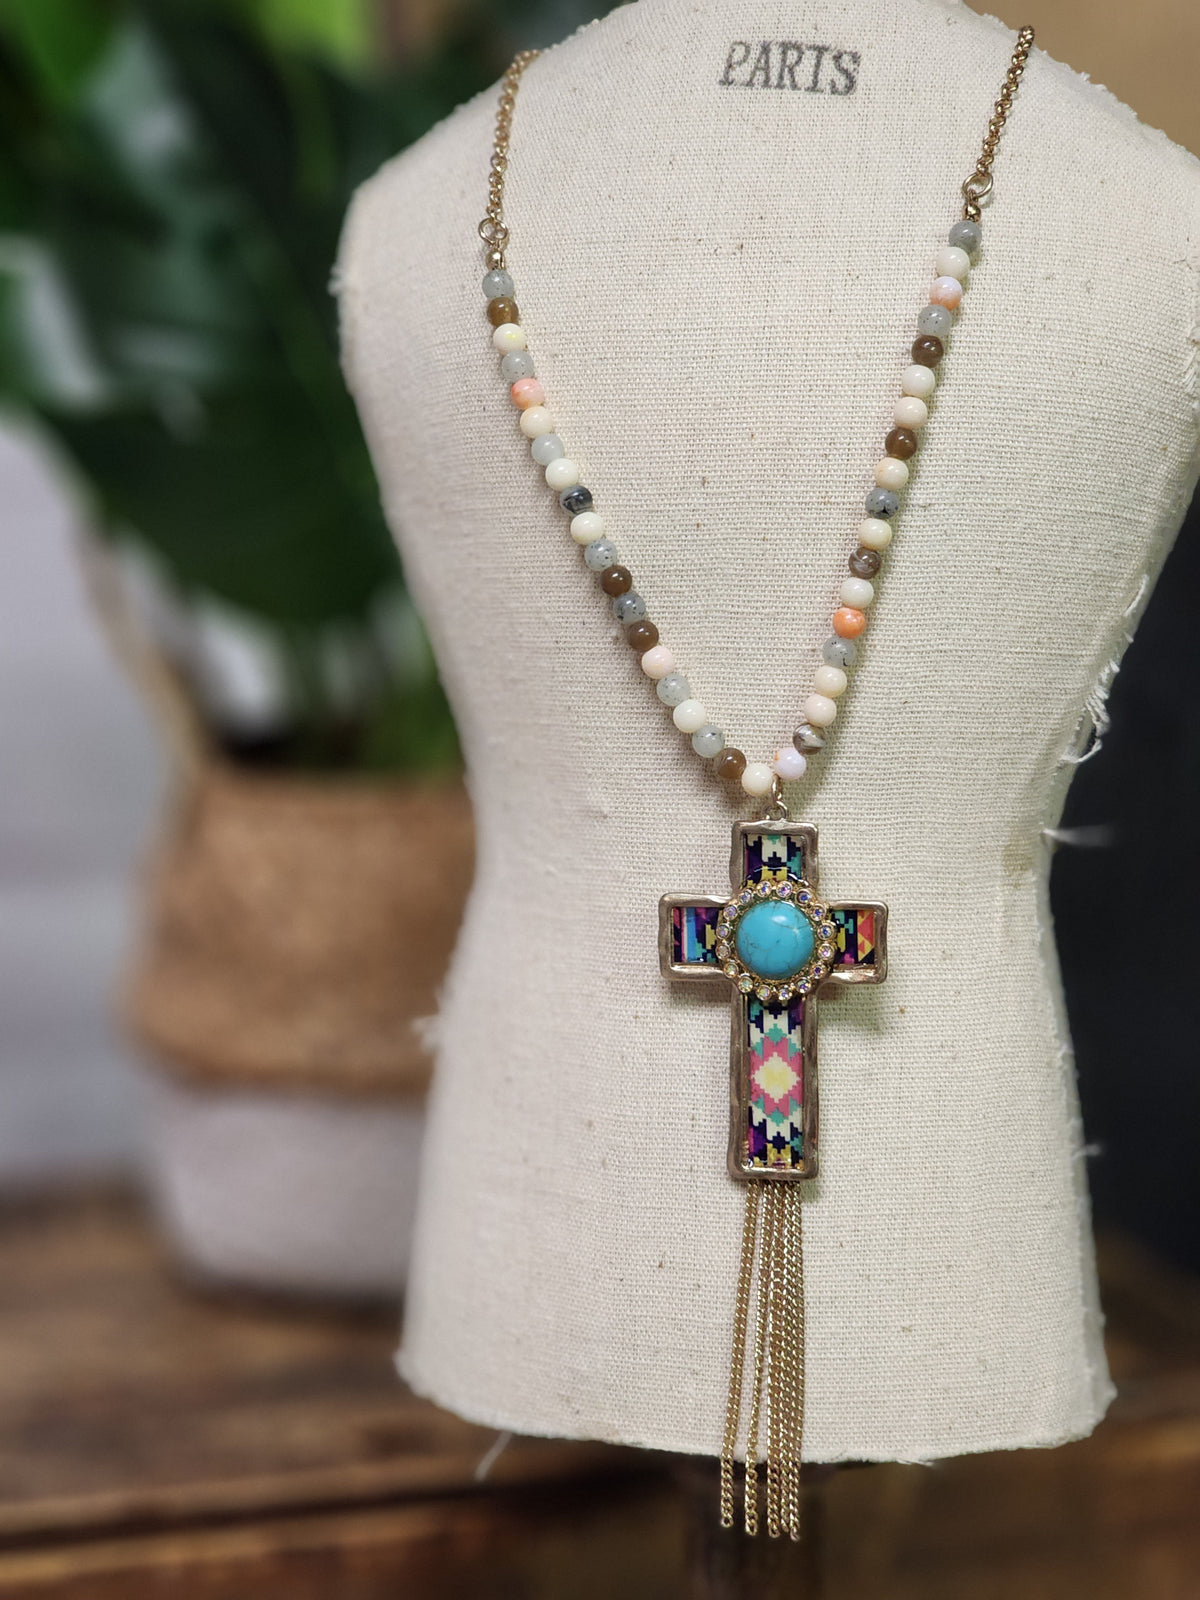 Aztec Print Cross with gold chain tassel necklace * on sale